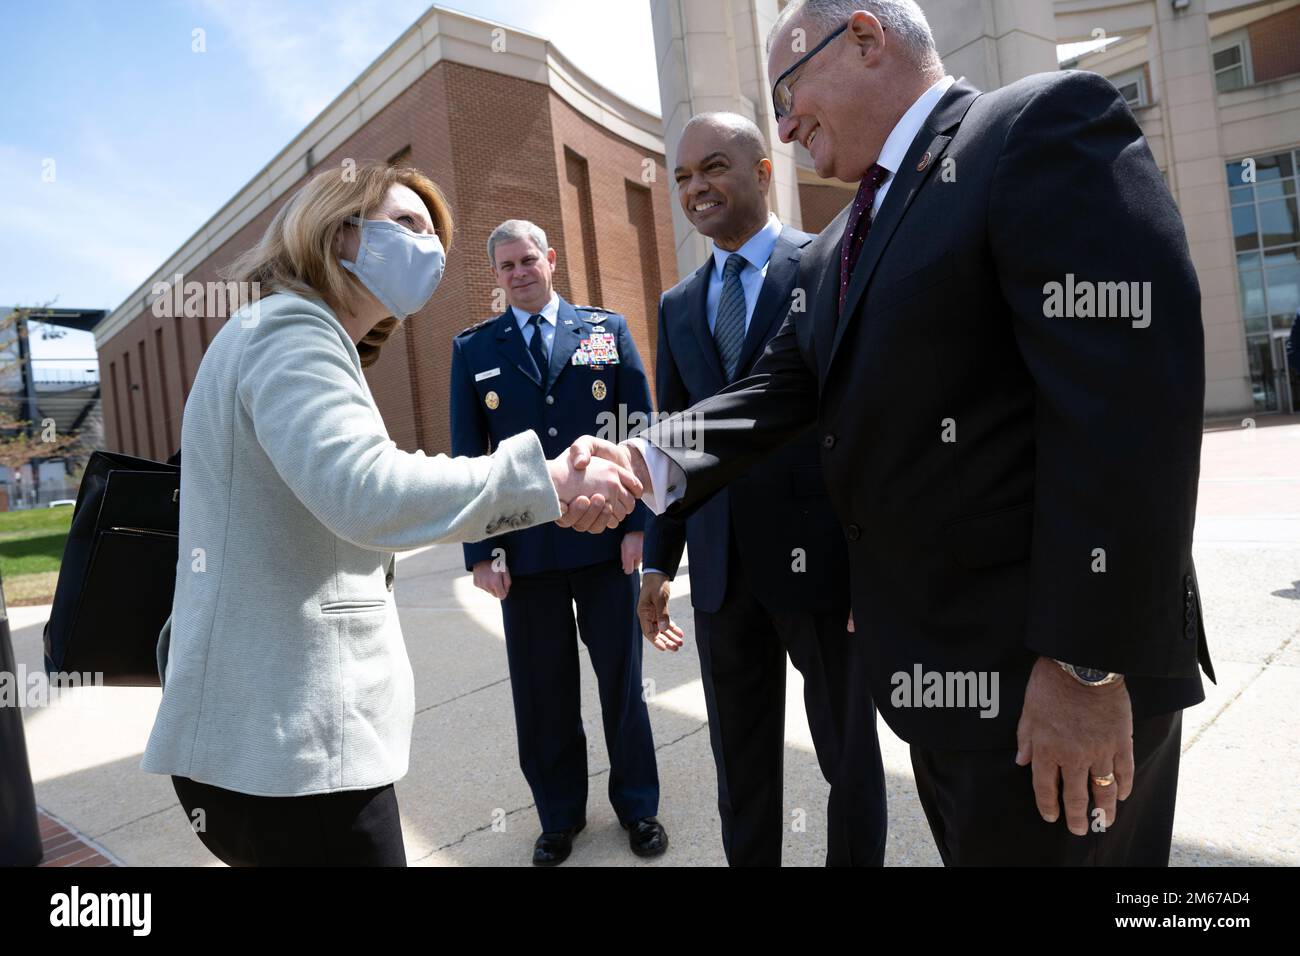 Deputy Secretary of Defense Kathleen H. Hicks shakes hands with the chief operating officer of Business Executives for National Defense (BENS), Guy “Tom” Cosentino, before an industry discussion at the National Defense University, Washington, D.C., April 11, 2022. Also pictured are Air Force Lt. Gen. Michael T. Plehn, president of the National Defense University; and Gregory S. Nixon, BENS Board of Directors. (DoD photo by Lisa Ferdinando) Stock Photo